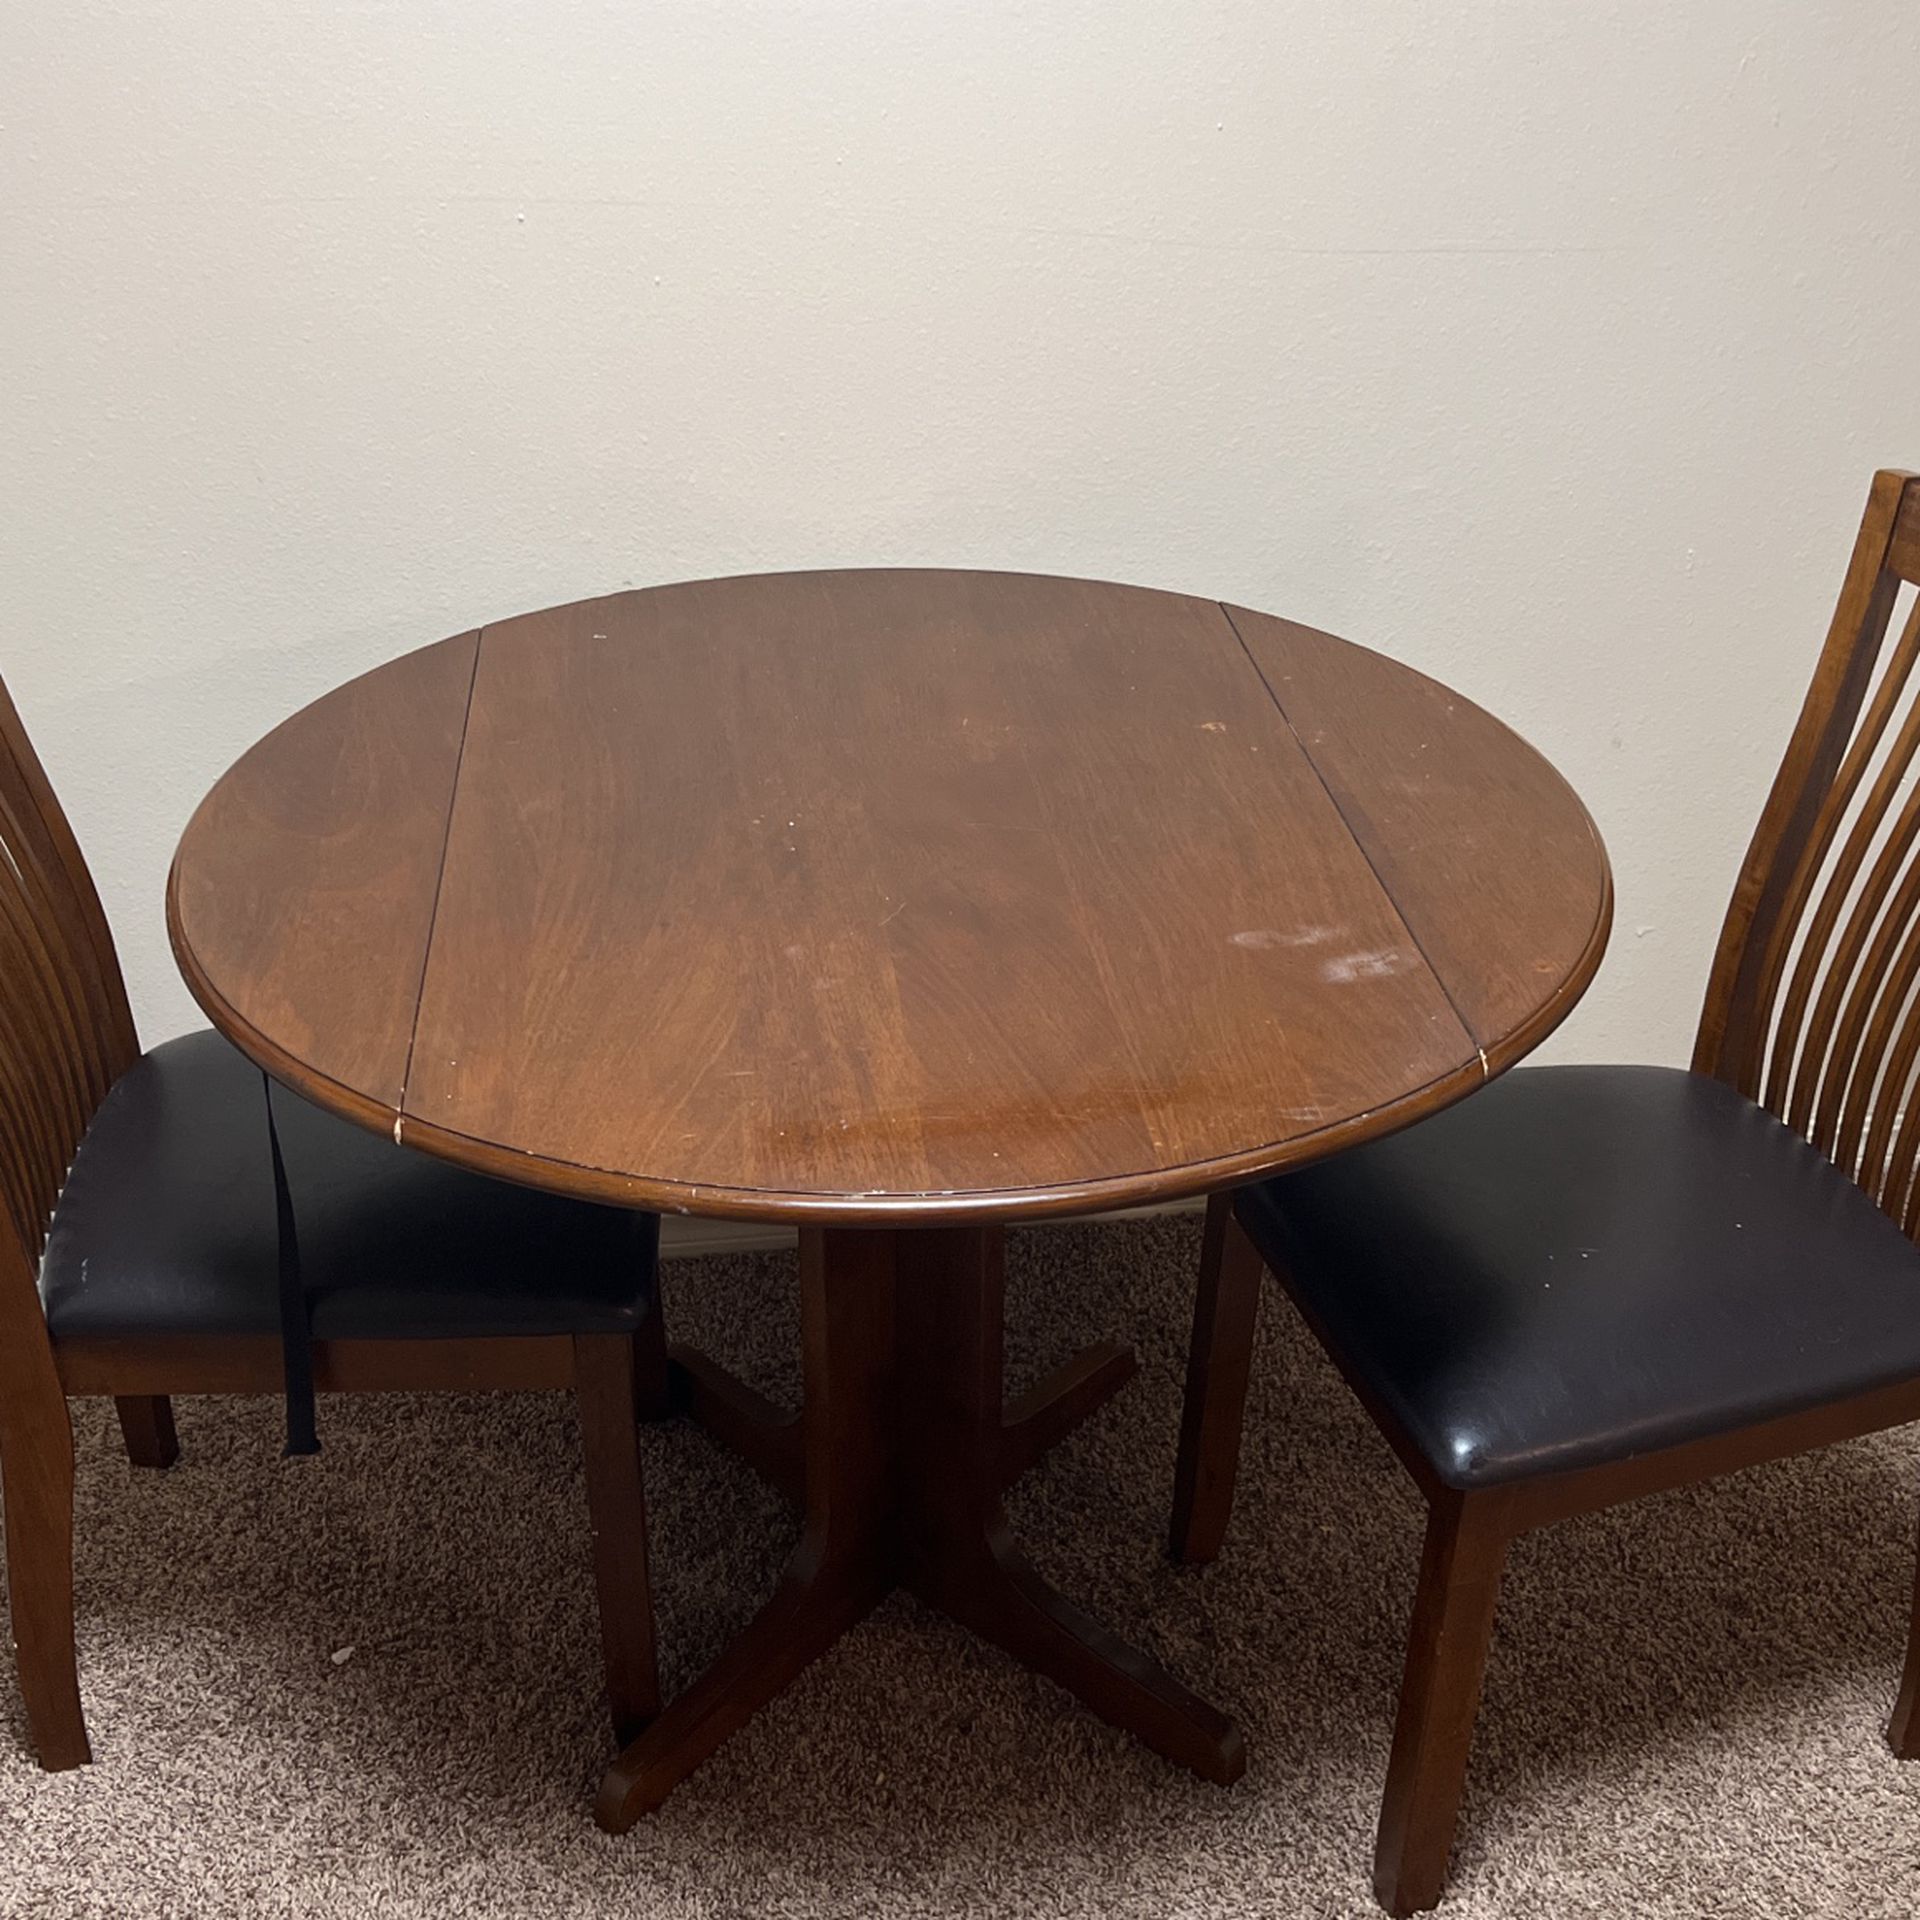 Two Seat Dining Room Table